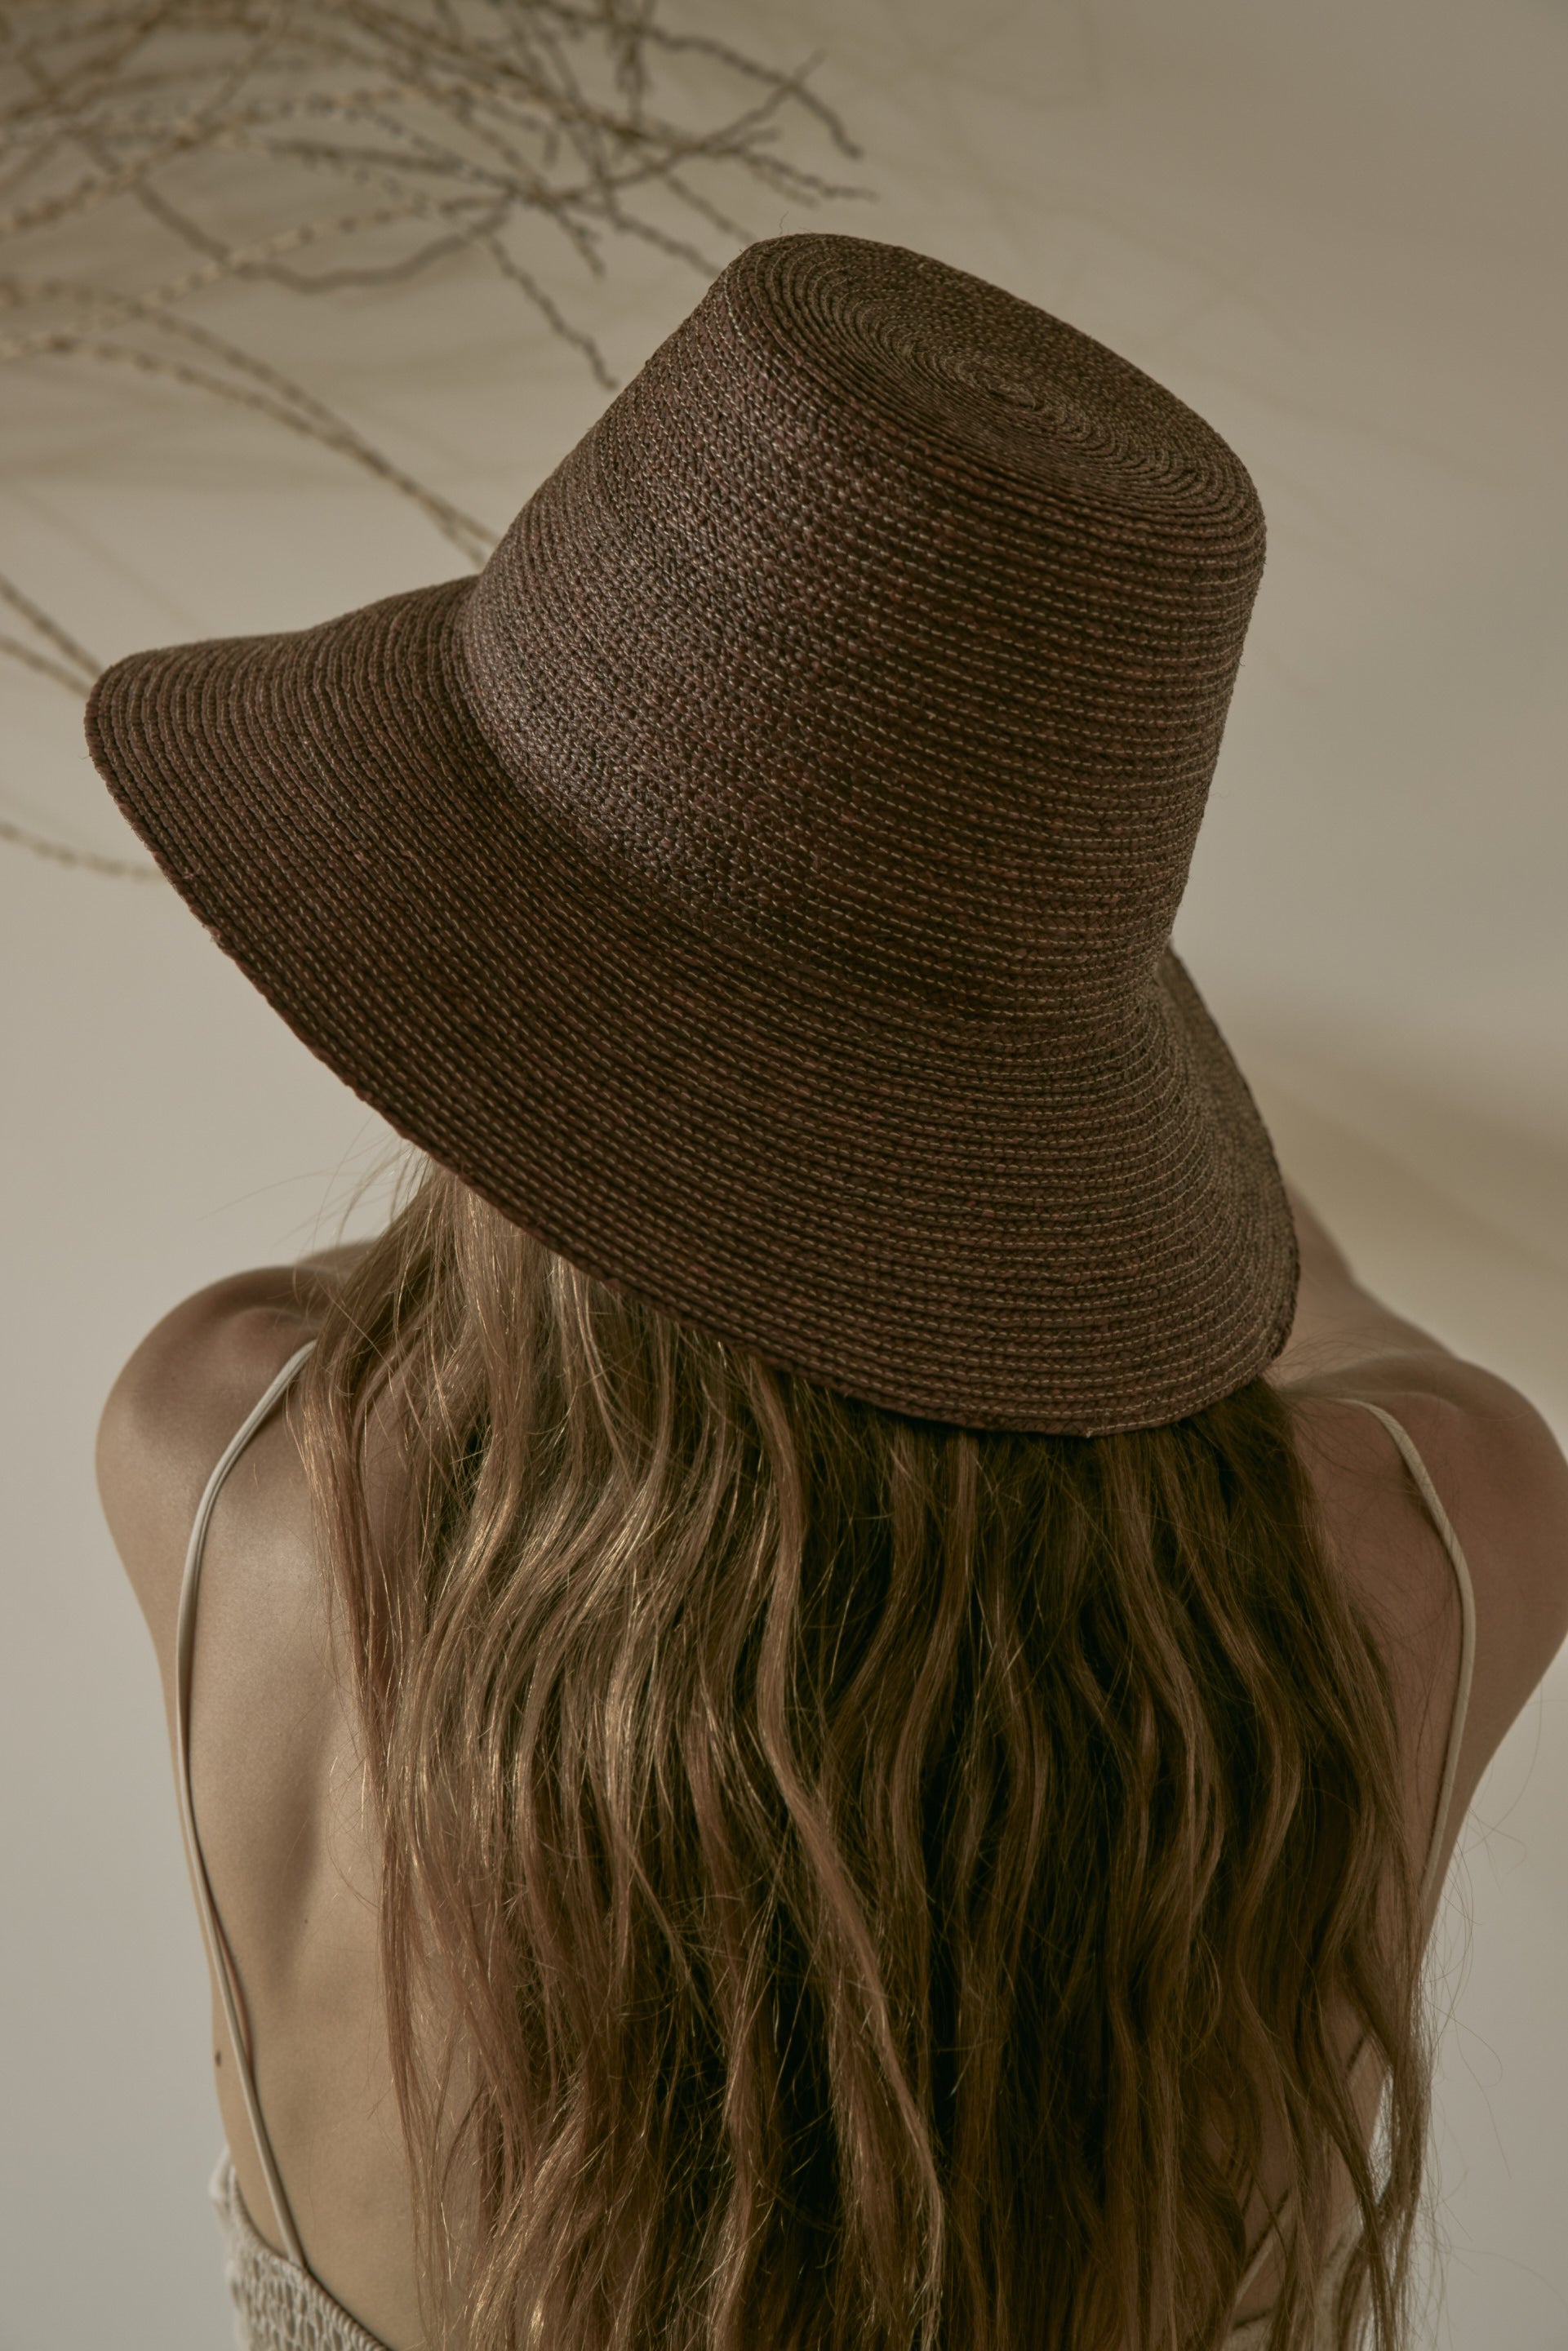 JANESSA LEONÉ Wes Hat in Chocolate